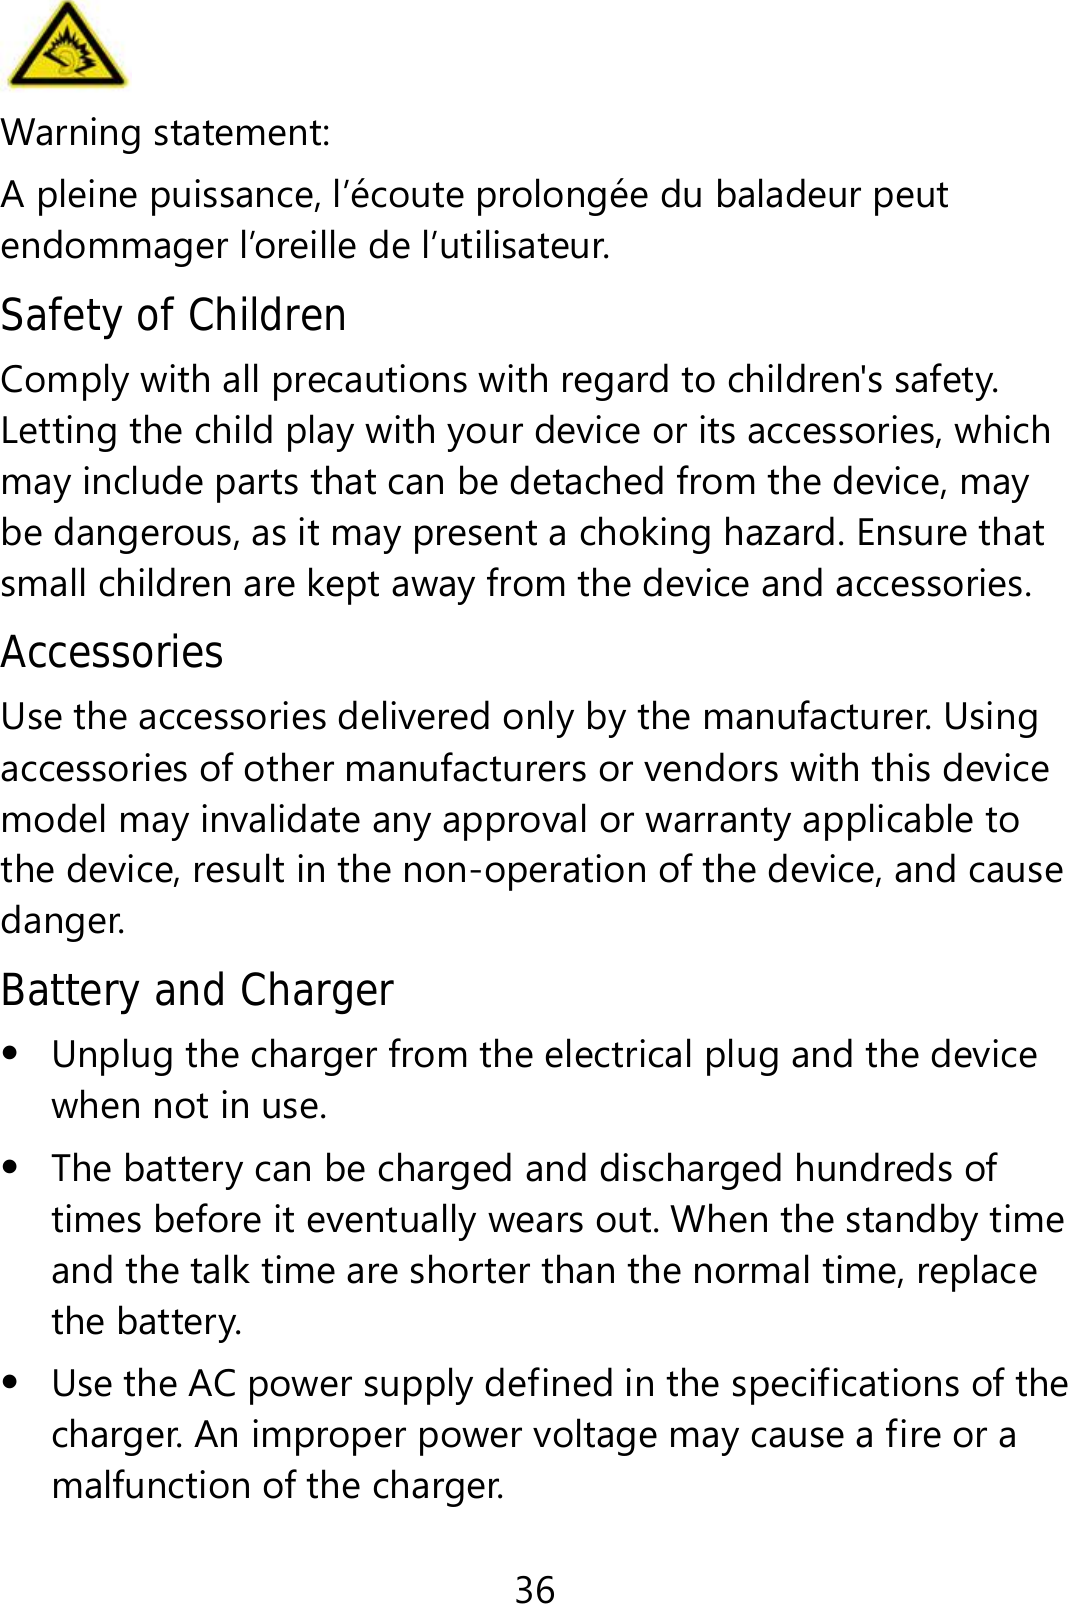 36  Warning statement:   A pleine puissance, l’écoute prolongée du baladeur peut endommager l’oreille de l’utilisateur. Safety of Children Comply with all precautions with regard to children&apos;s safety. Letting the child play with your device or its accessories, which may include parts that can be detached from the device, may be dangerous, as it may present a choking hazard. Ensure that small children are kept away from the device and accessories. Accessories Use the accessories delivered only by the manufacturer. Using accessories of other manufacturers or vendors with this device model may invalidate any approval or warranty applicable to the device, result in the non-operation of the device, and cause danger. Battery and Charger  Unplug the charger from the electrical plug and the device when not in use.  The battery can be charged and discharged hundreds of times before it eventually wears out. When the standby time and the talk time are shorter than the normal time, replace the battery.  Use the AC power supply defined in the specifications of the charger. An improper power voltage may cause a fire or a malfunction of the charger. 